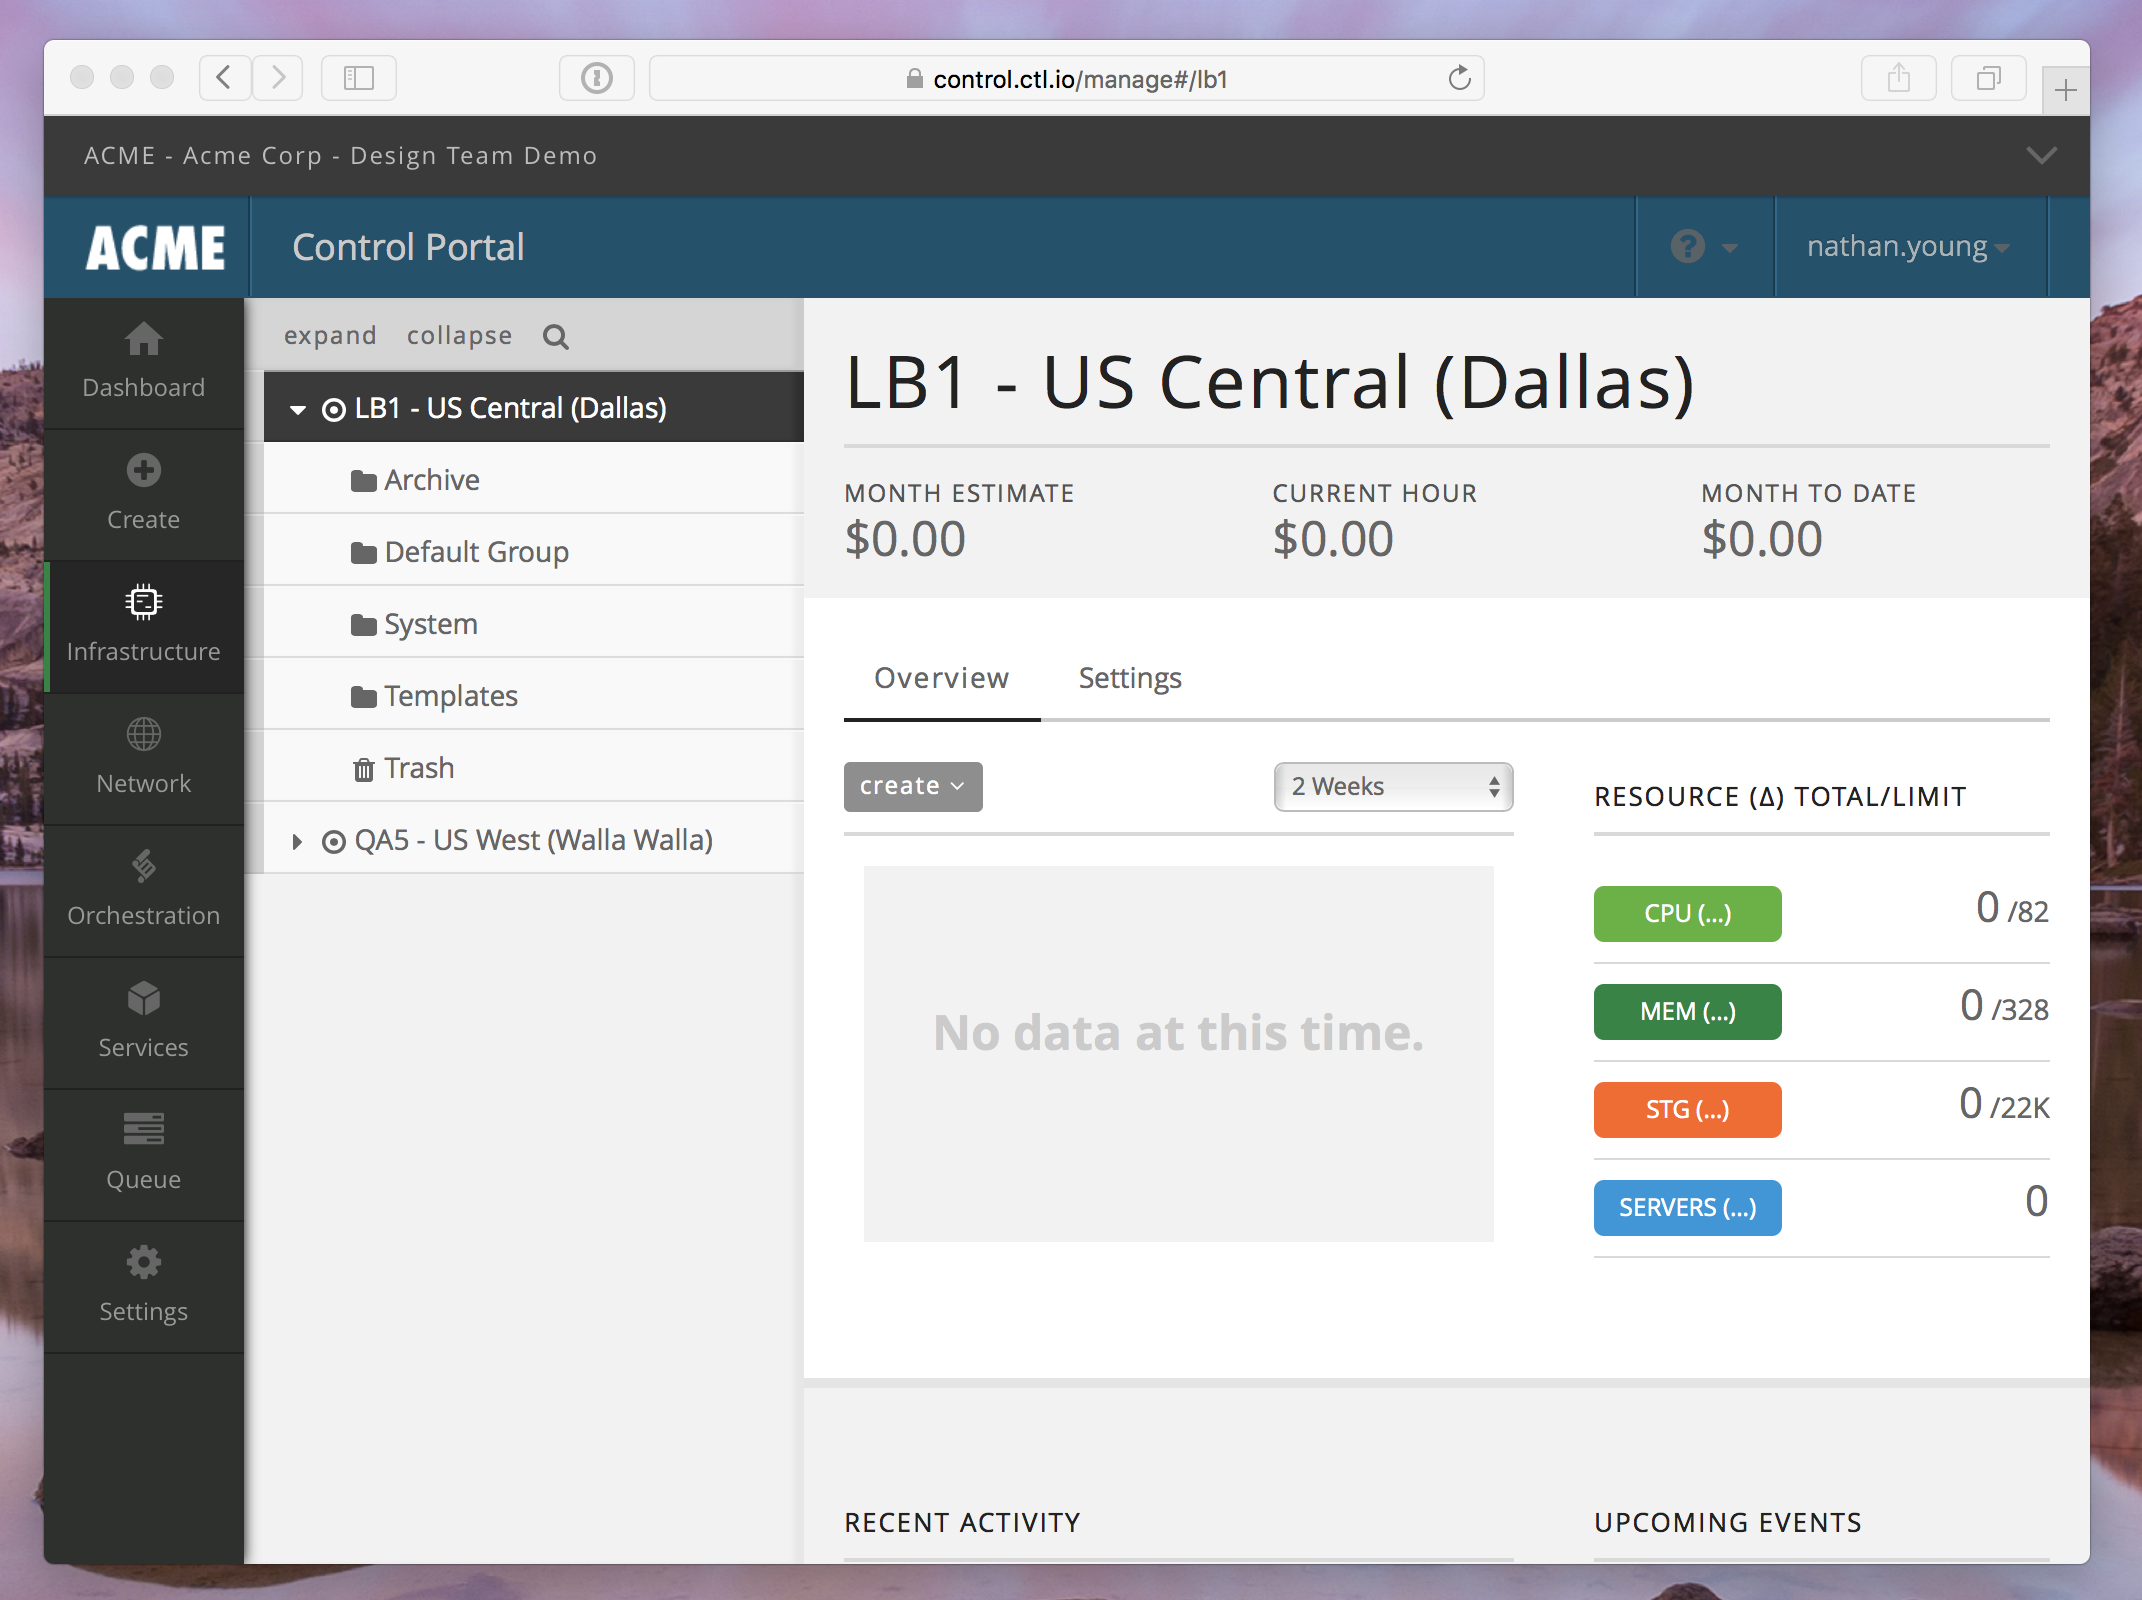 Screenshot of the Control Portal Dashboard with custom color bar and logo